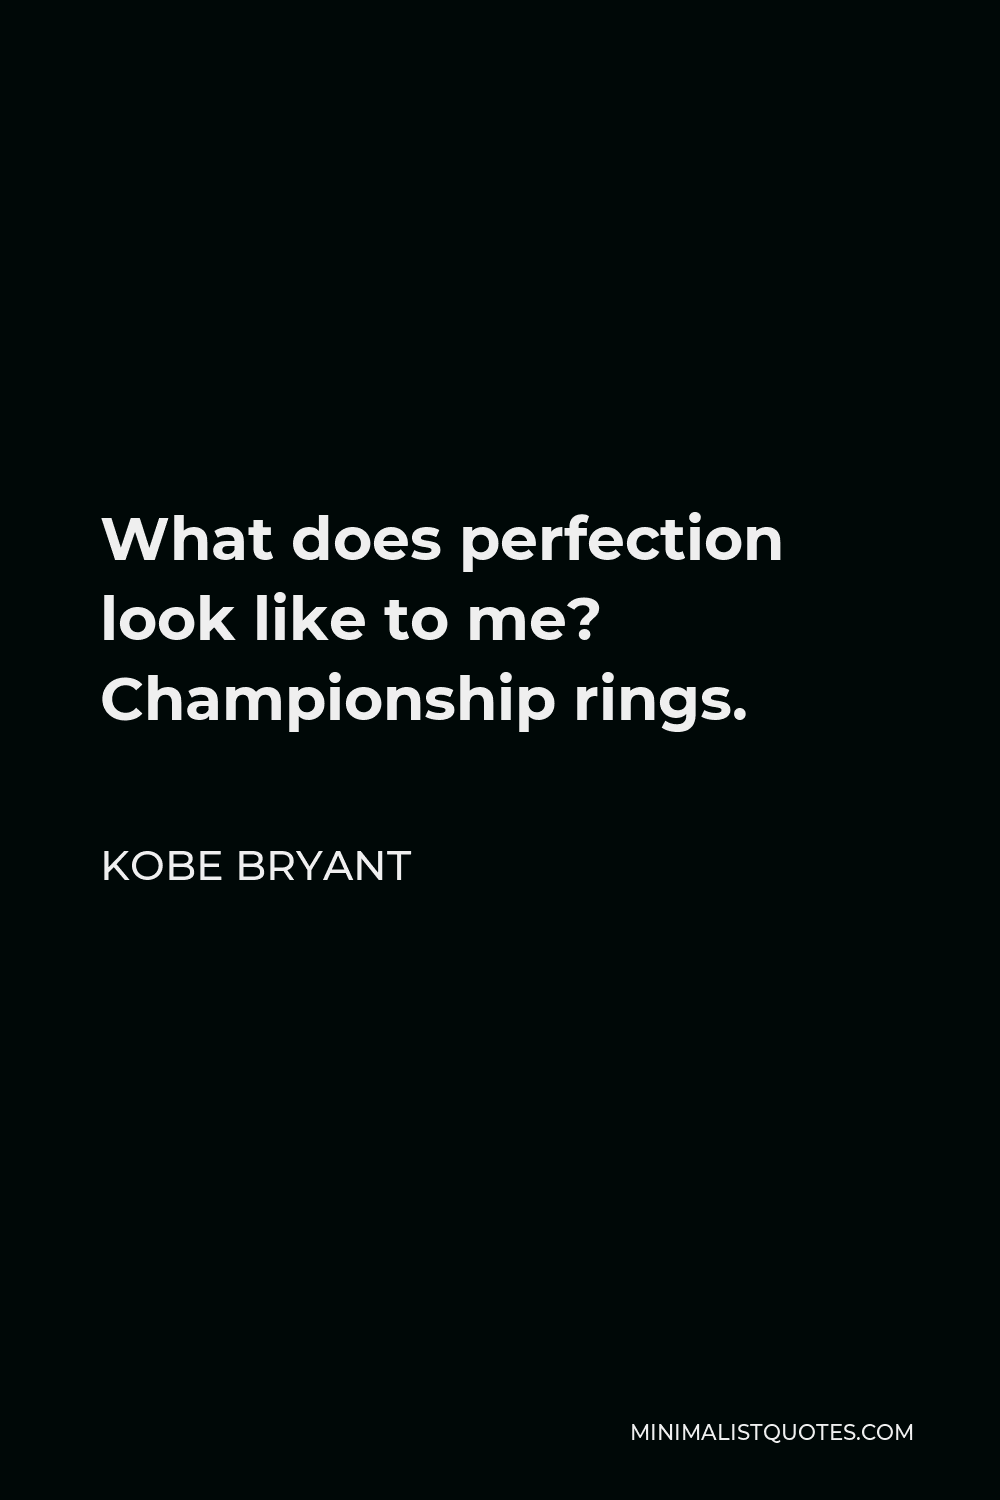 Kobe Bryant Quote - What does perfection look like to me? Championship rings.